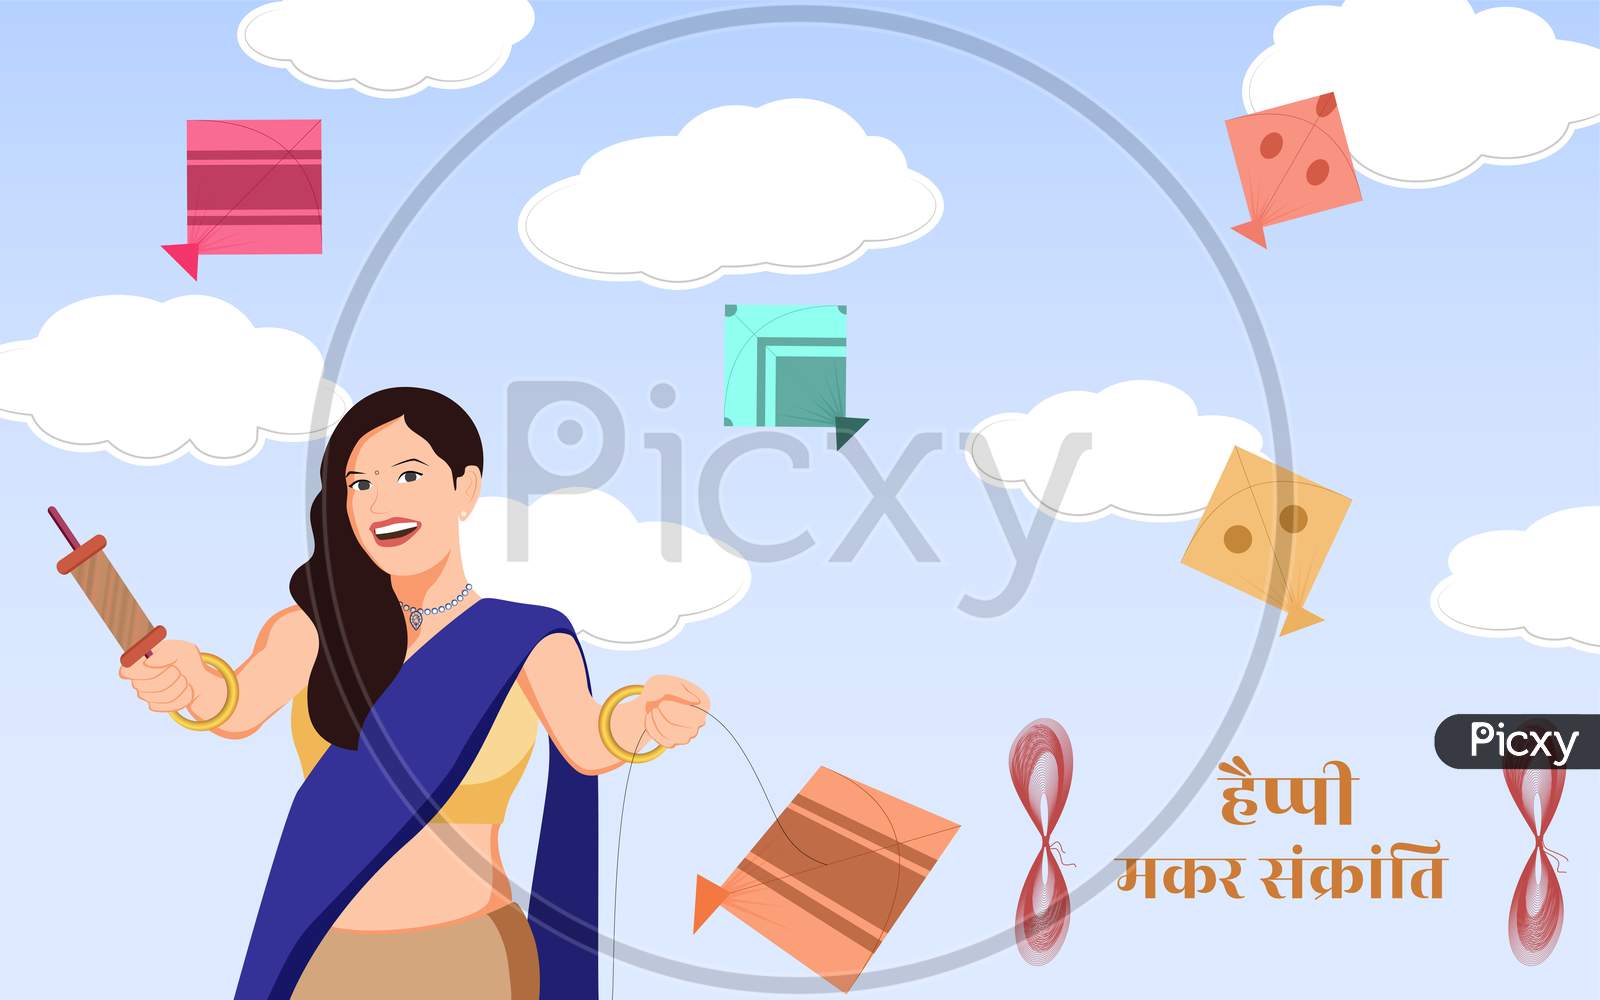 Indian Girl With Charkhi And Patang On Blue Gradient Background With Cloud Shapes, Vector Illustration For Makar Sankranti Festival,